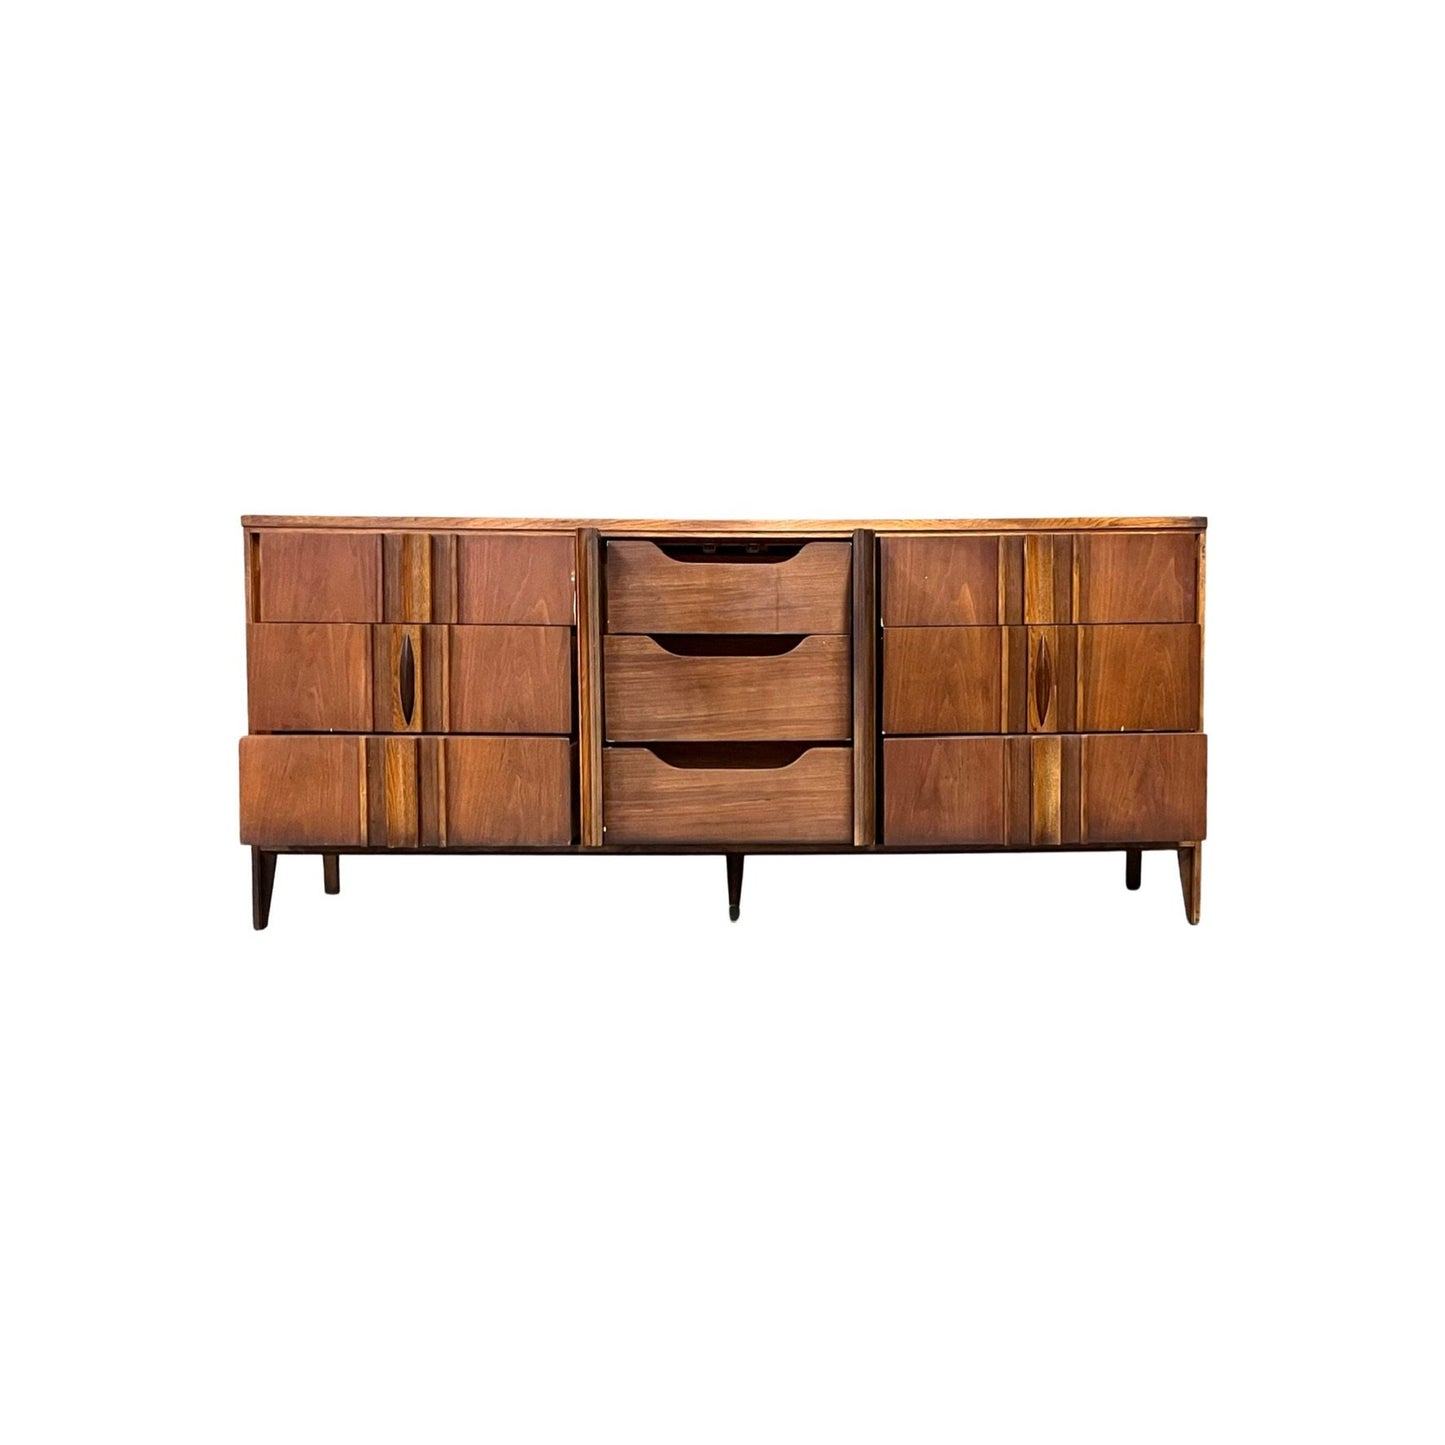 Thomasville vintage dresser from the 1960s, featuring ribbed facade and solid walnut accents